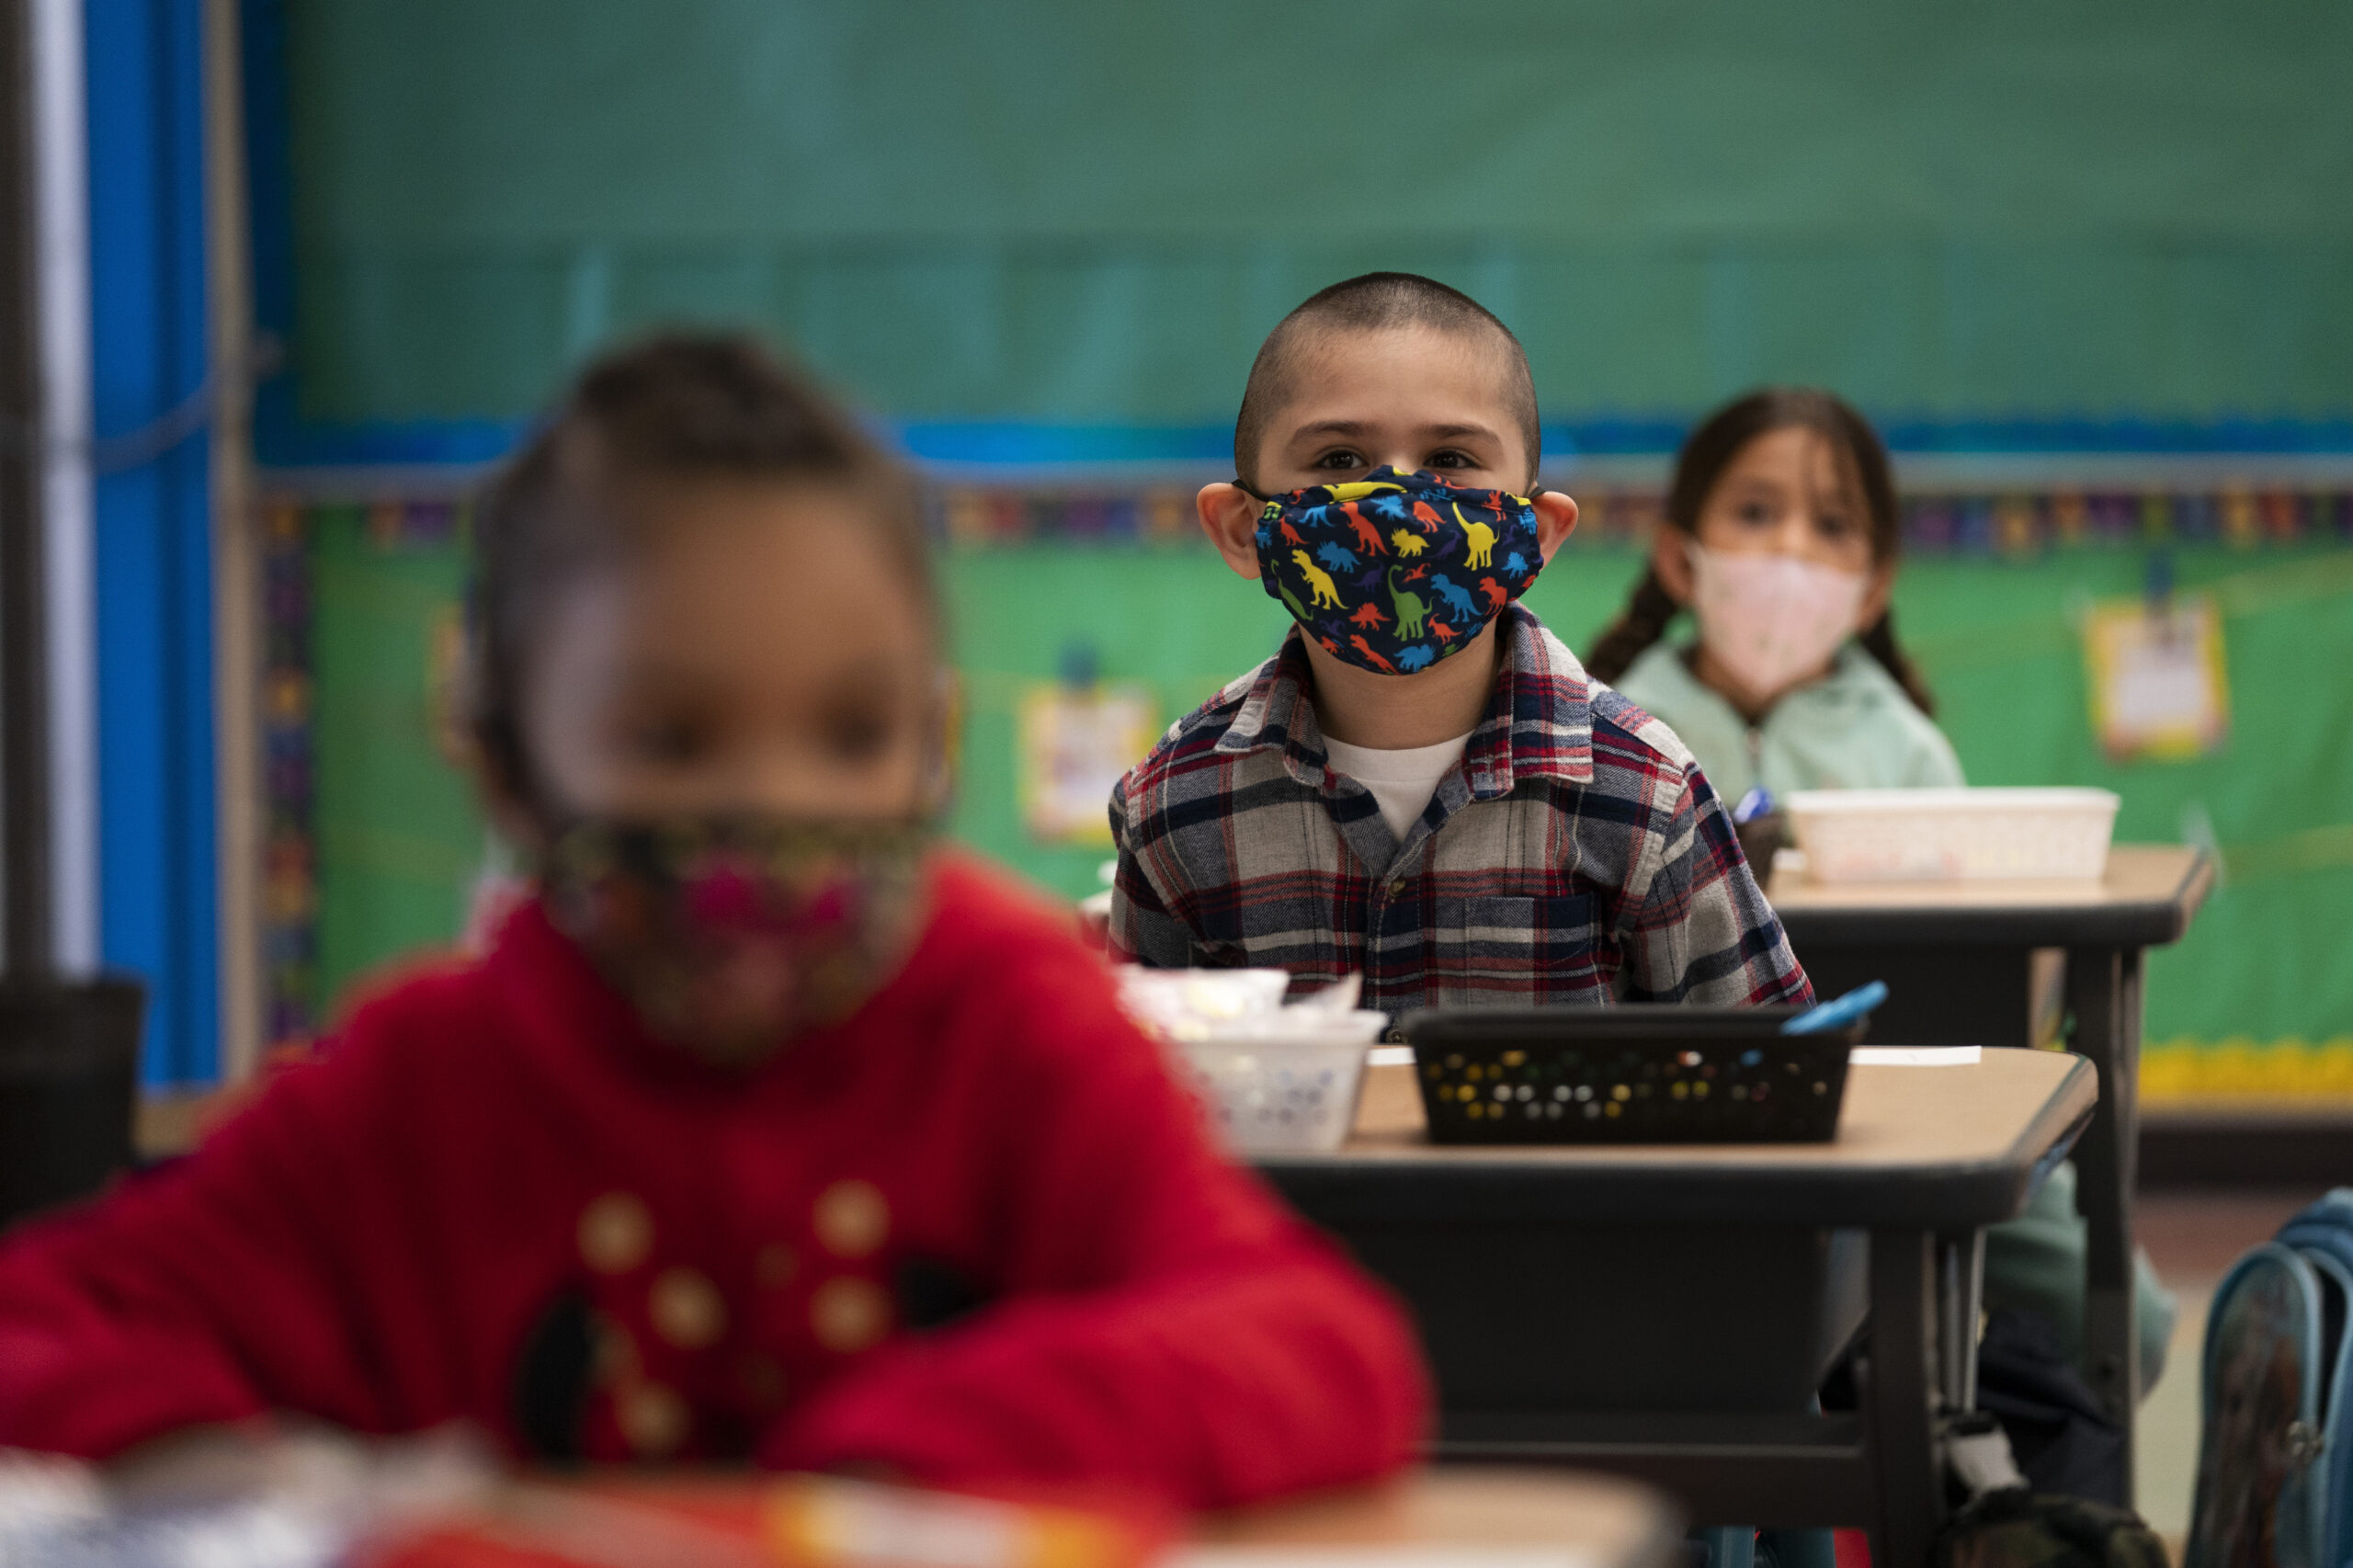 Kindergarten students wearing face masks sit in their classroom